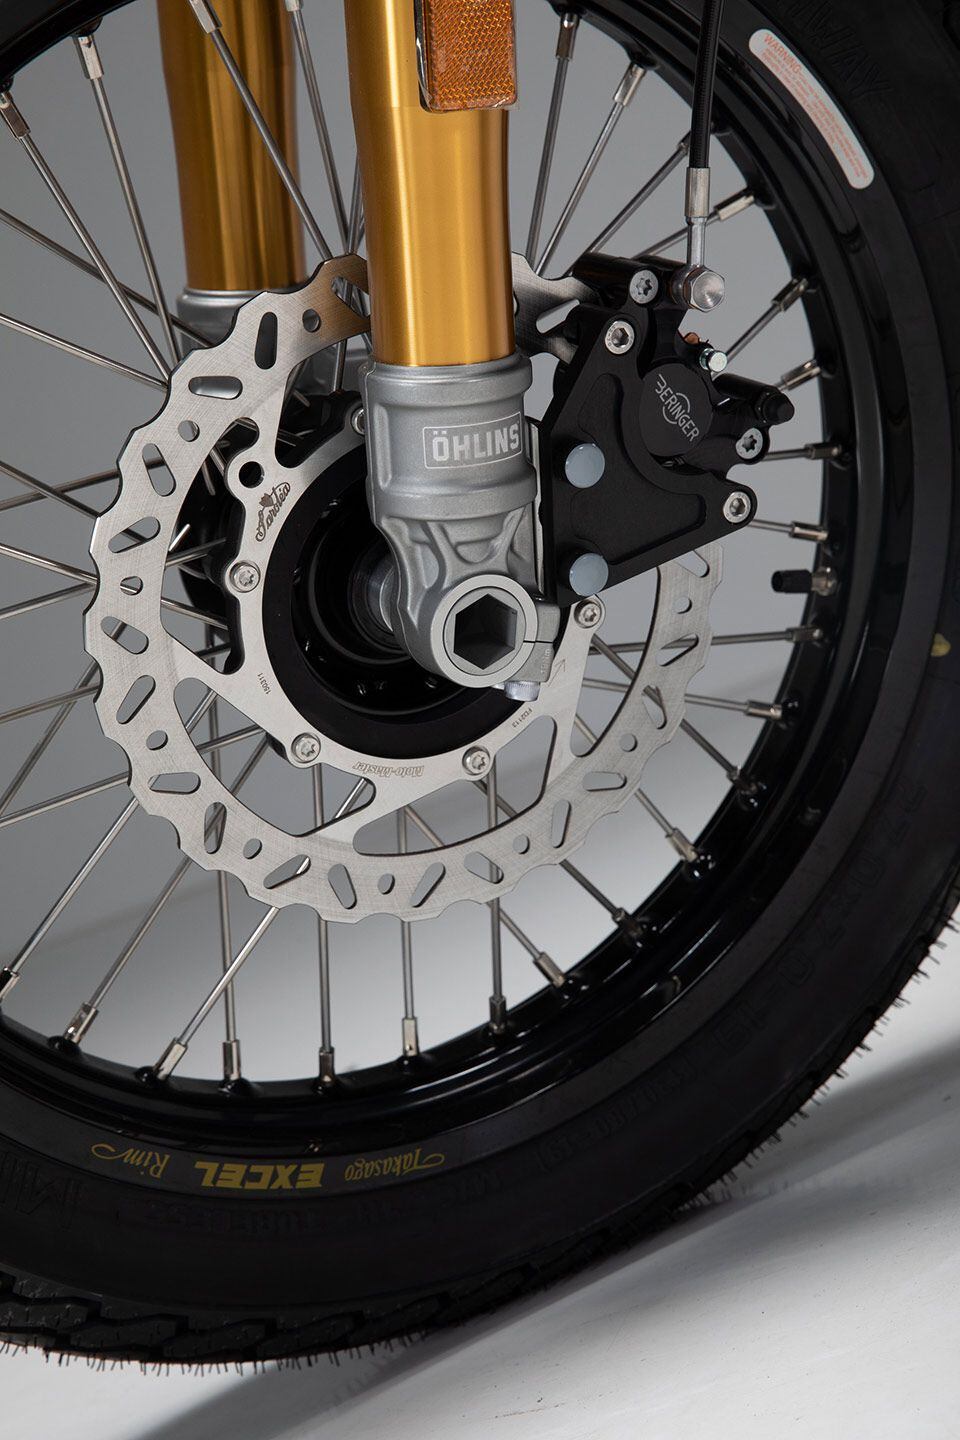 Öhlins supplies the front suspension, with Saroléa Performance Tech providing calibration. Beringer brake calipers appear front and rear.